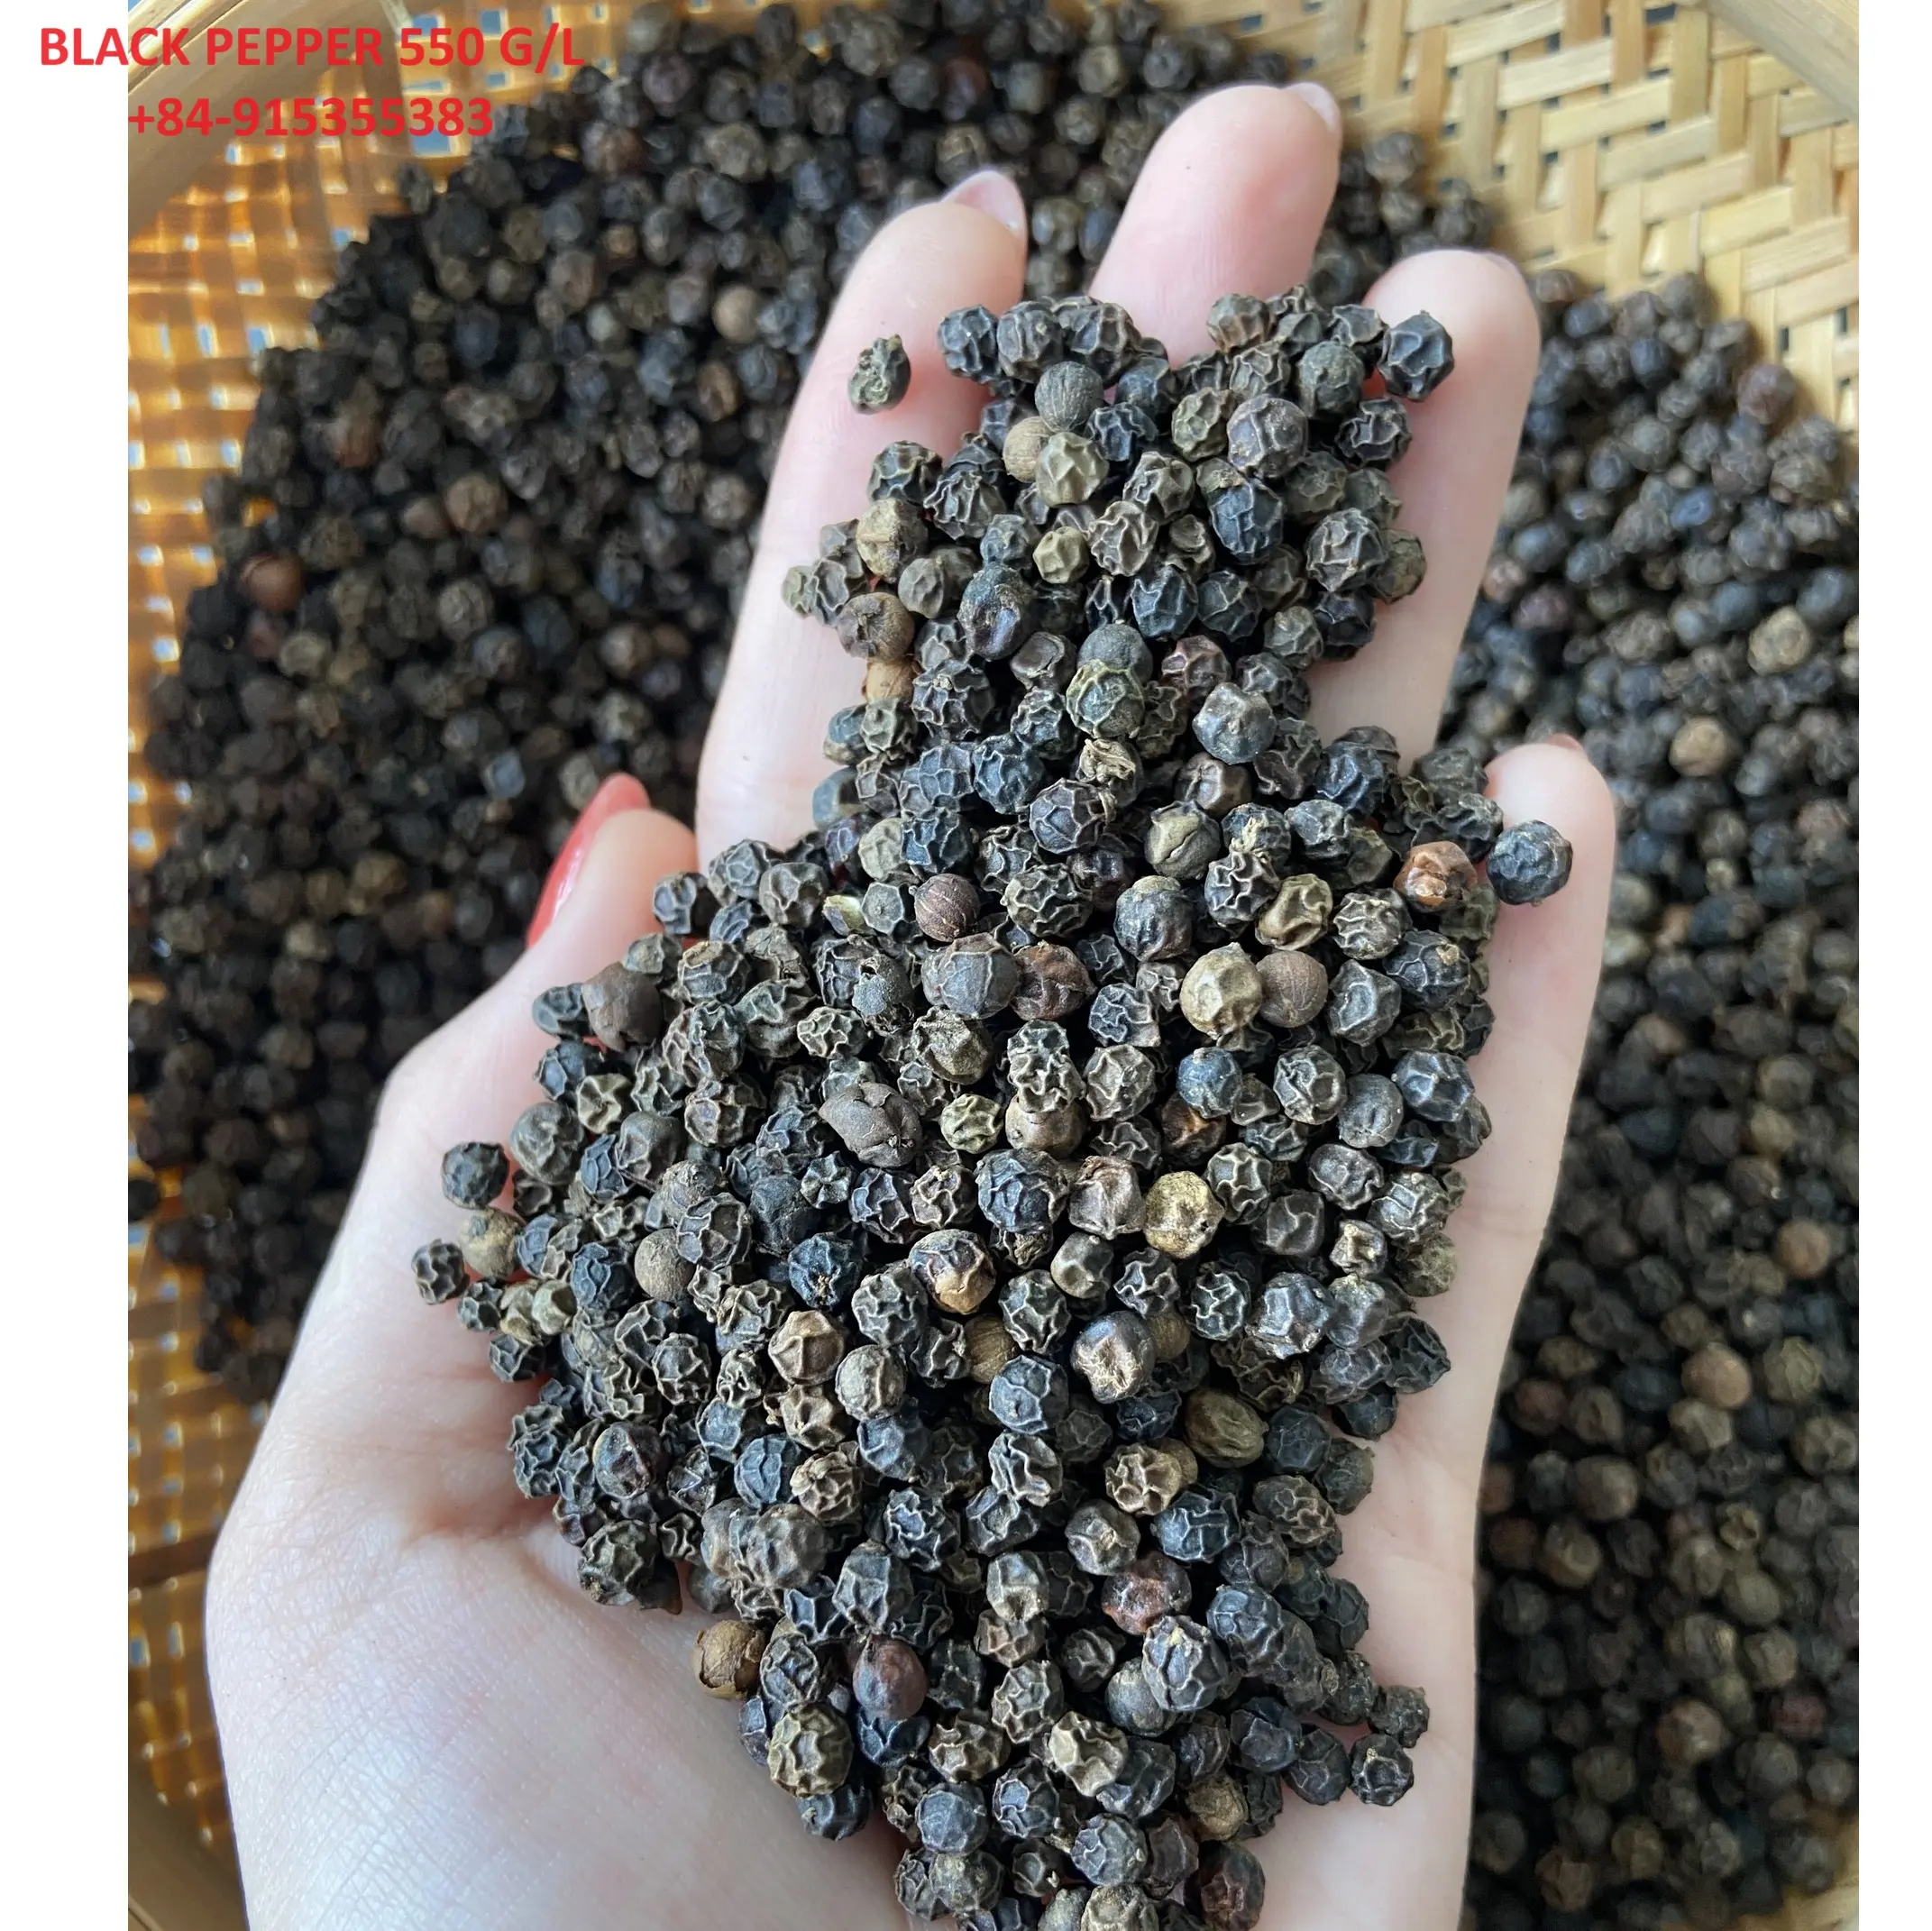 Hot Spicy White Black Pepper- Pinhead Premium Quality From TOP Vietnam Suppplier- WS: +84-915355383